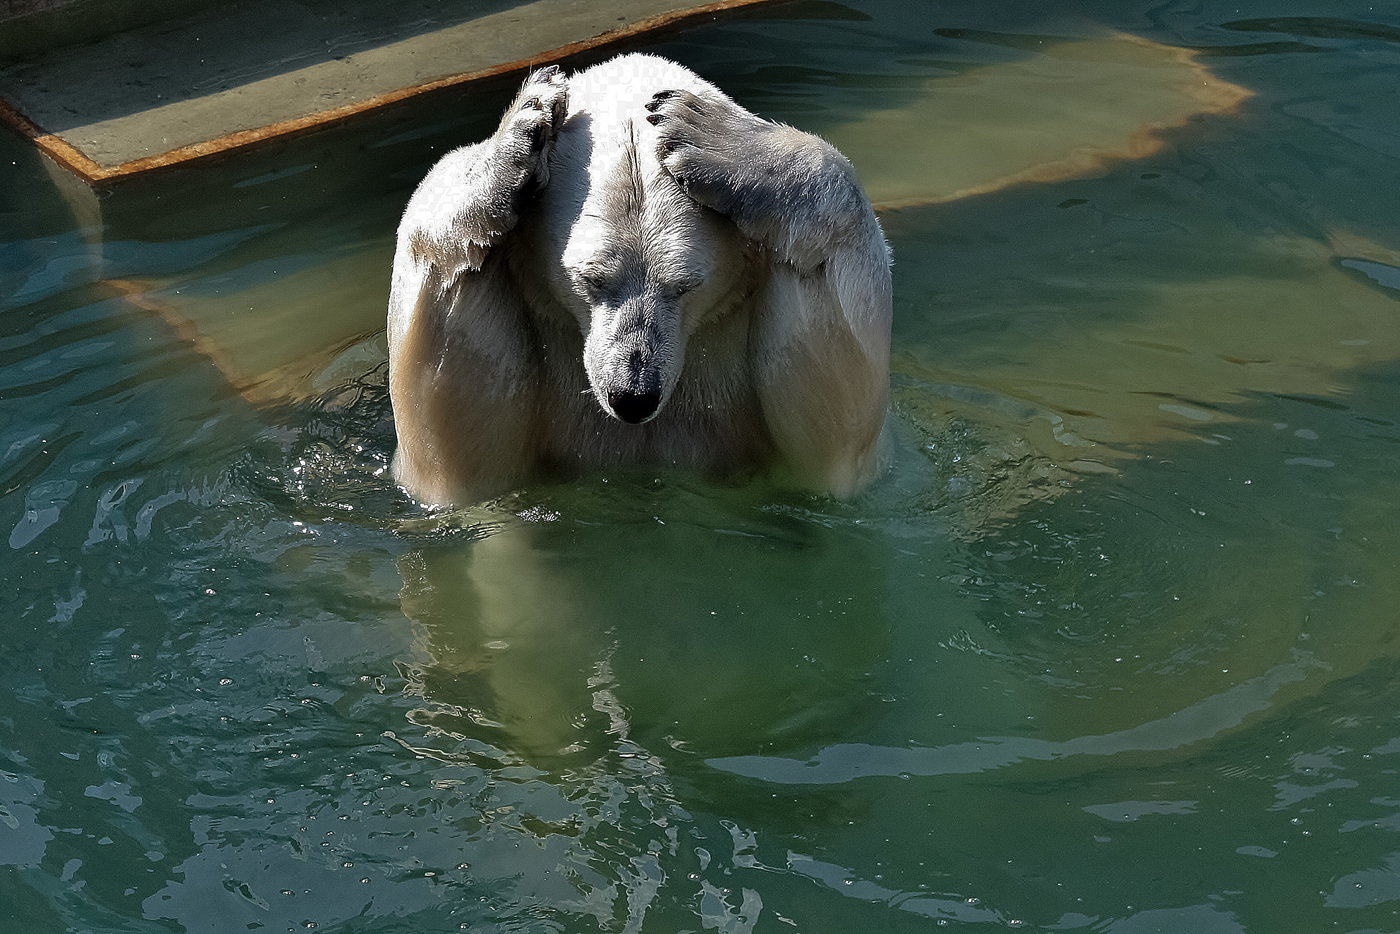 Polar bear escapes from the heat in the zoo